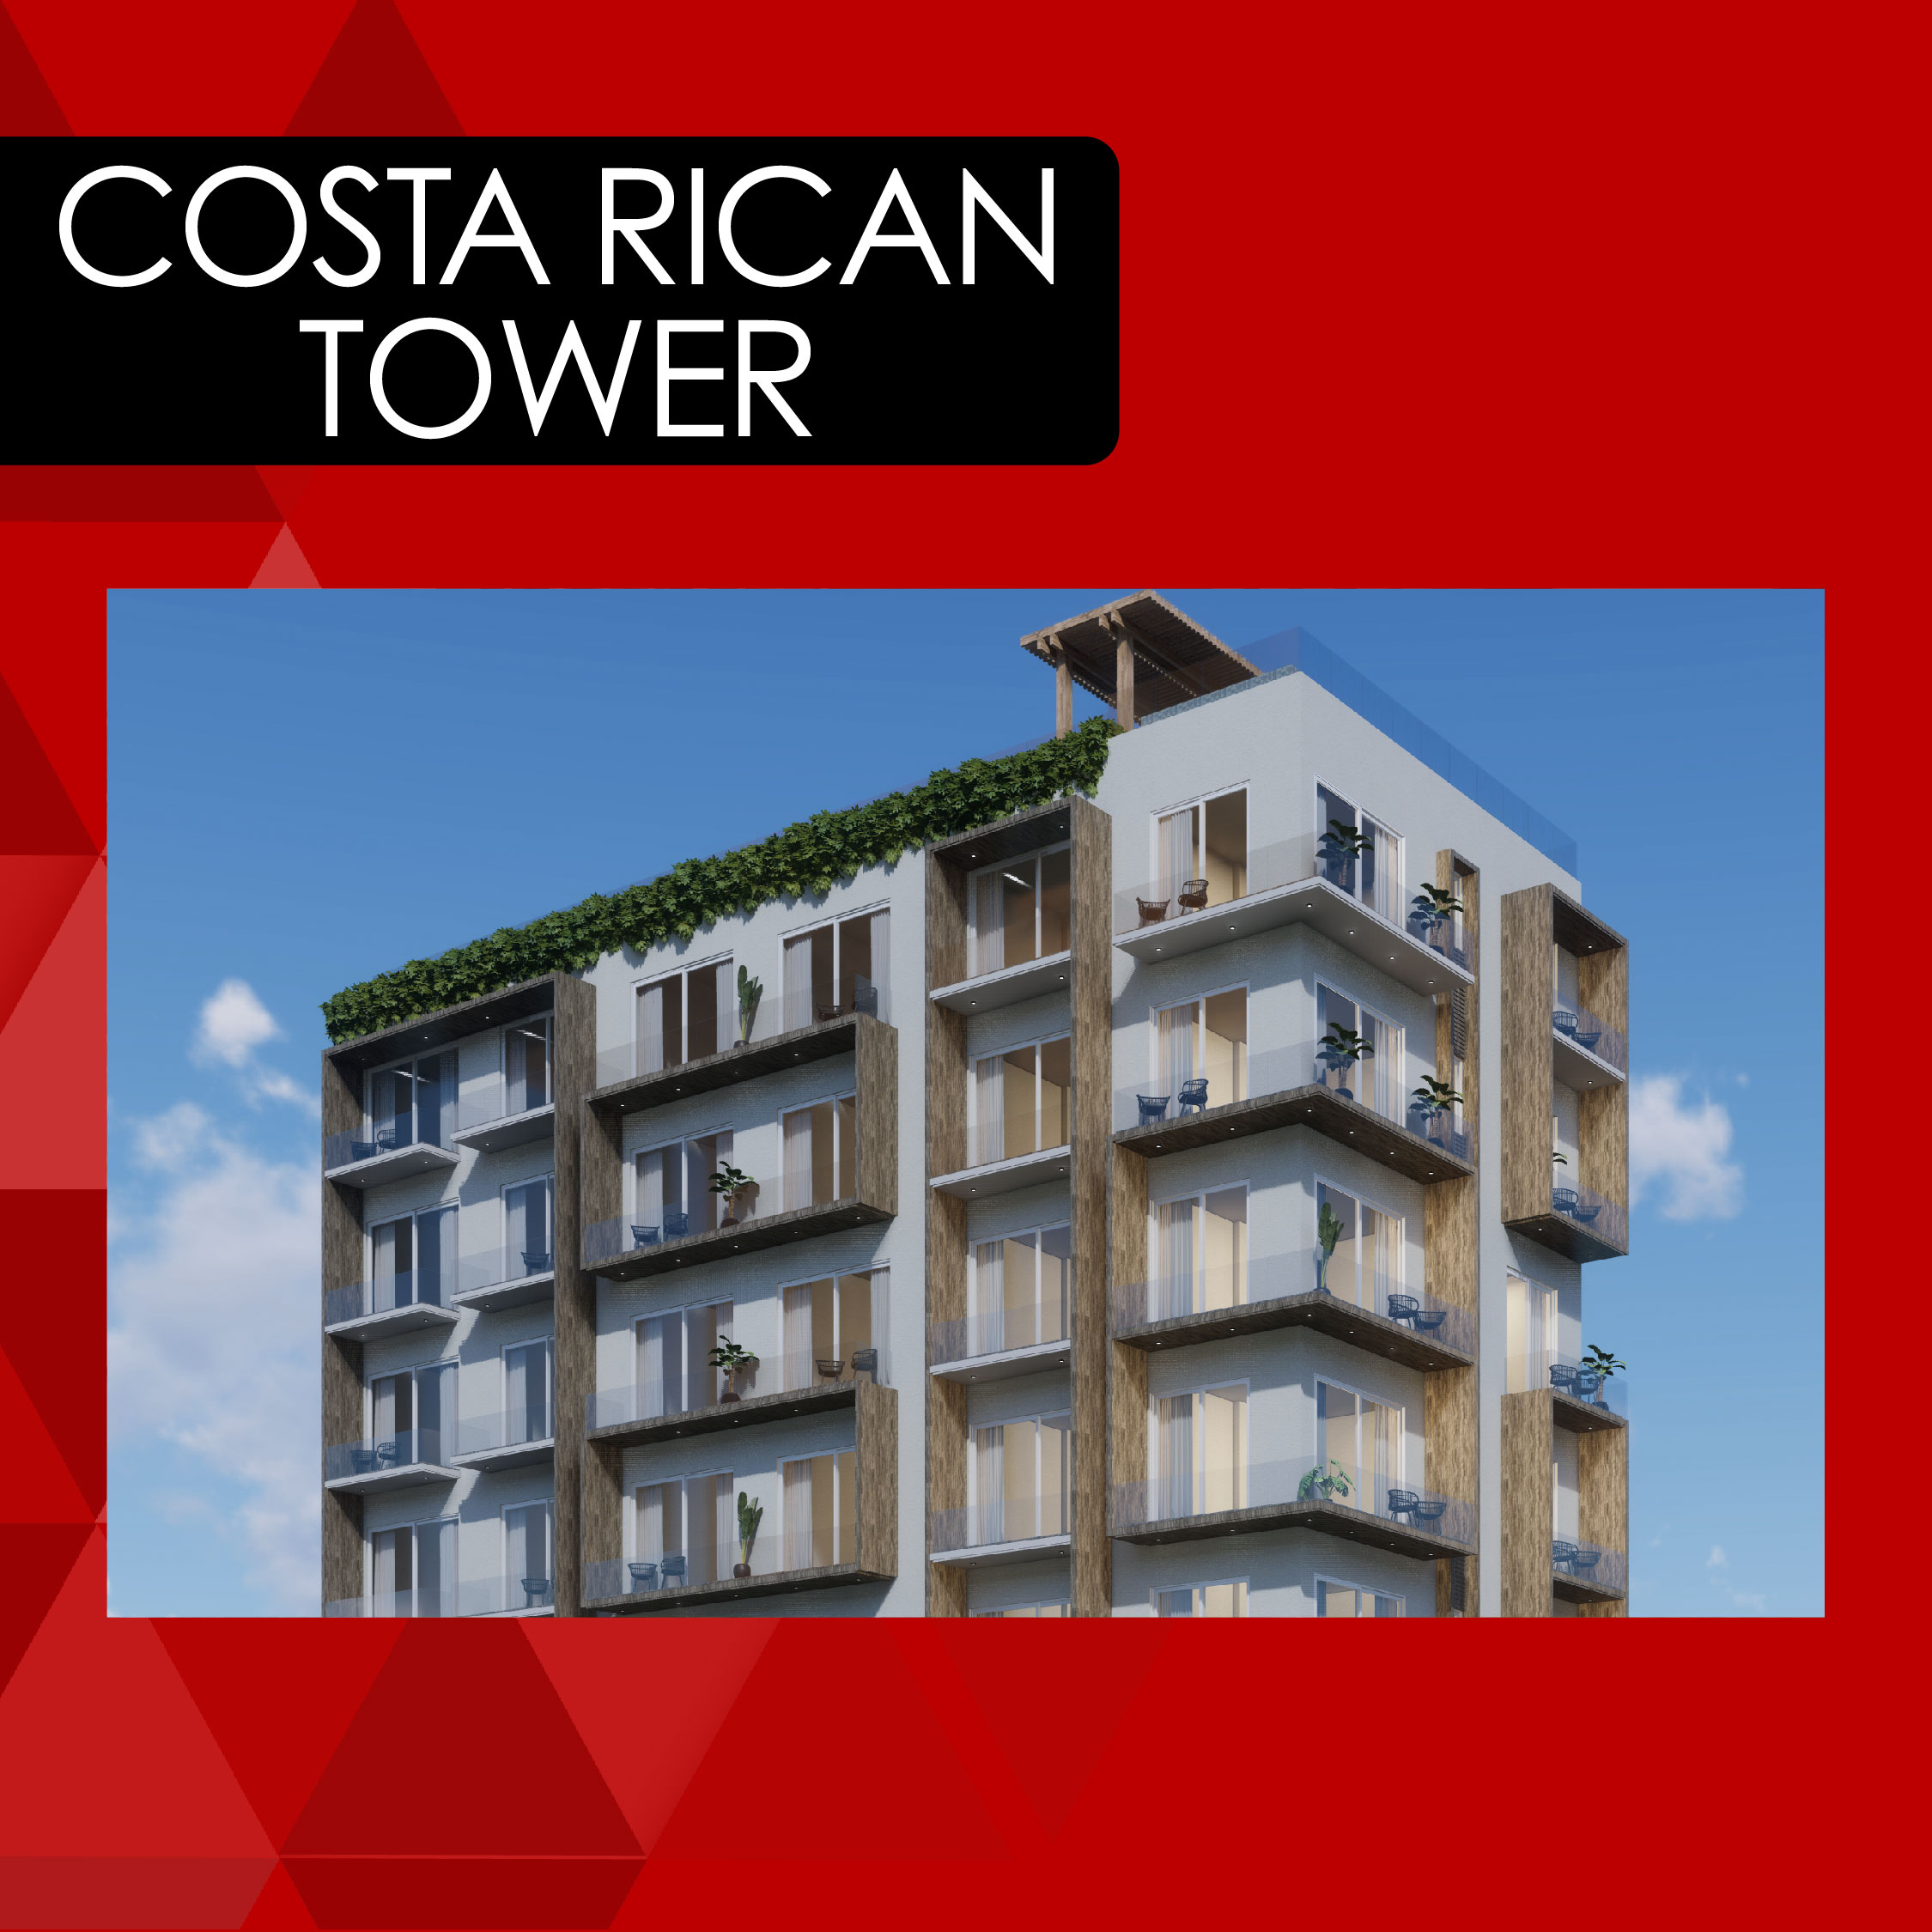 Costa Rican Tower